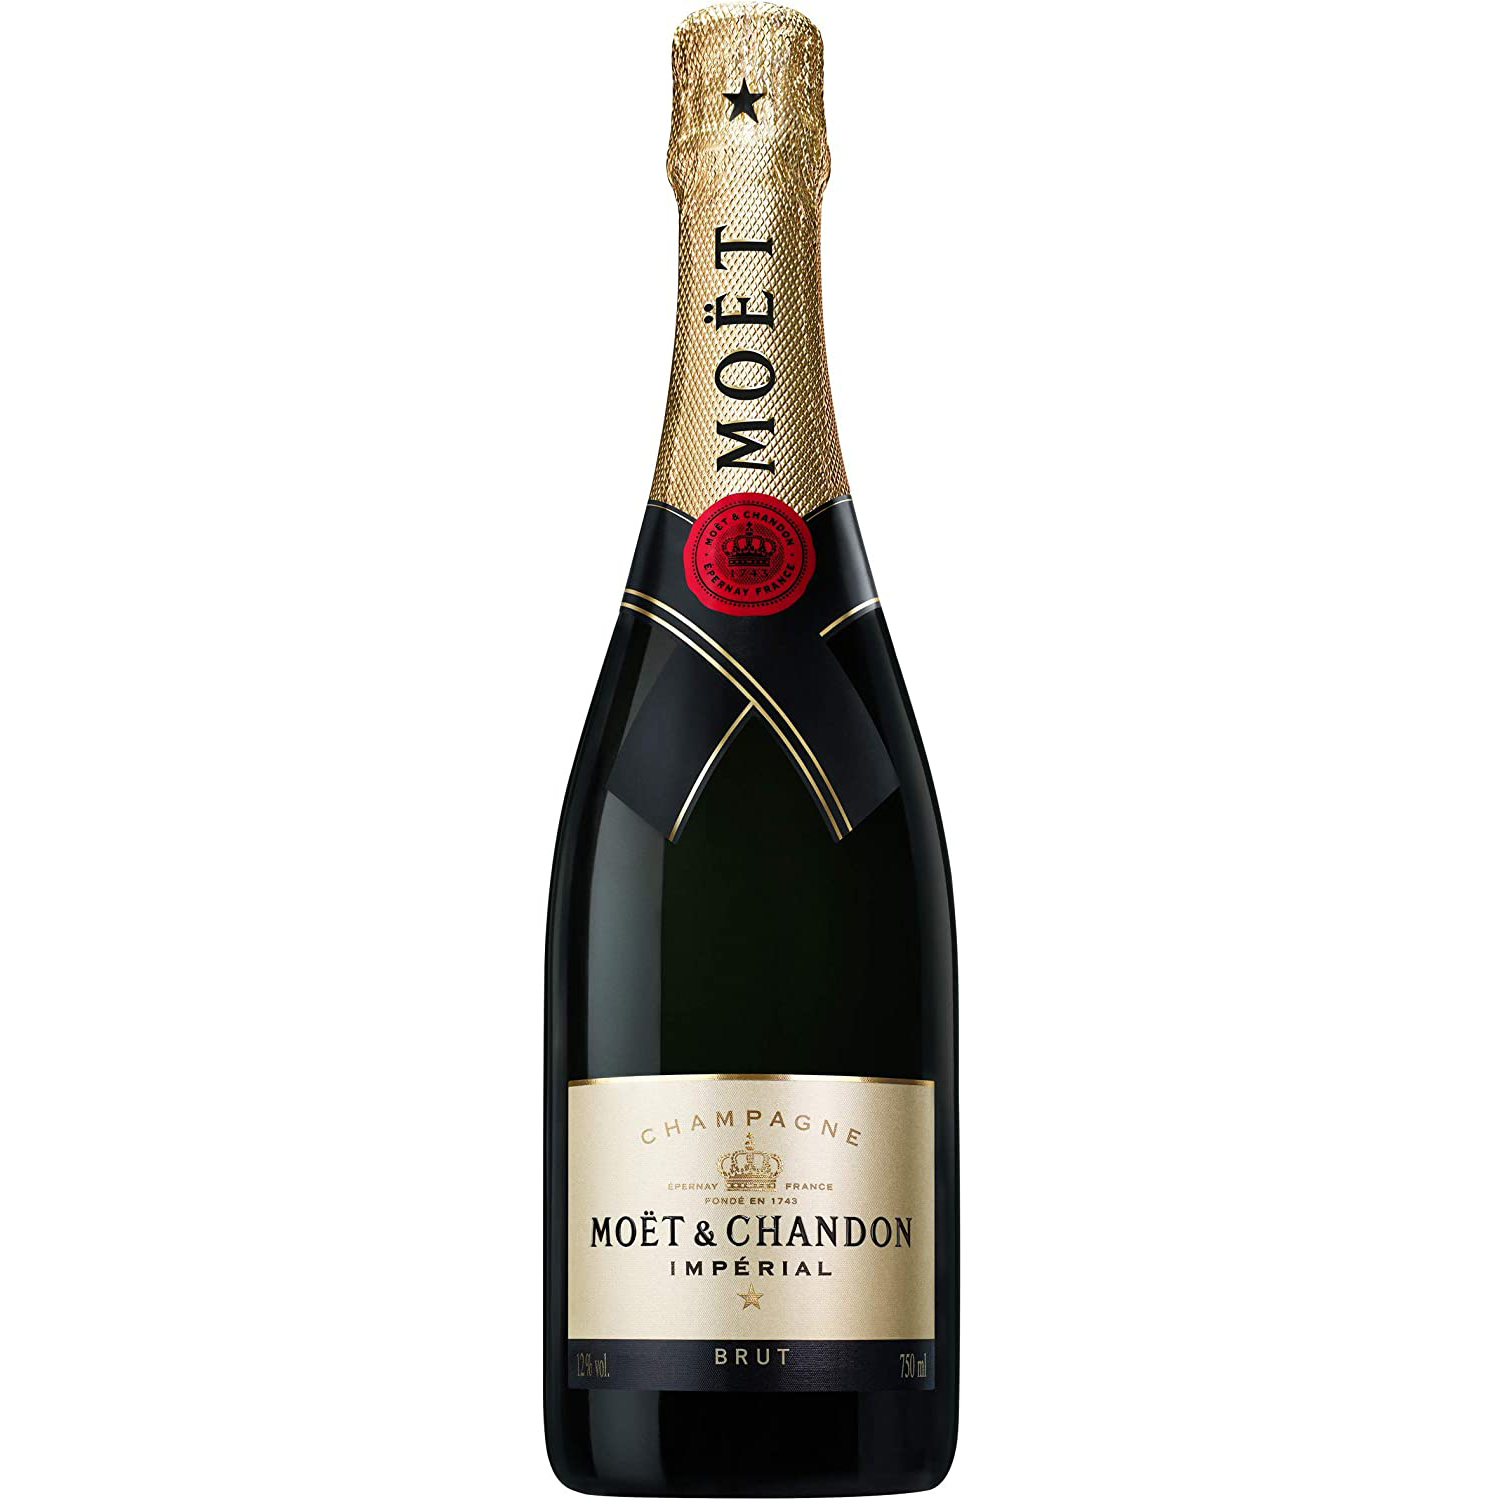 Moet And Chandon Imperial Brut Champagne 75cl in Gift Box Great Price and Home Delivery